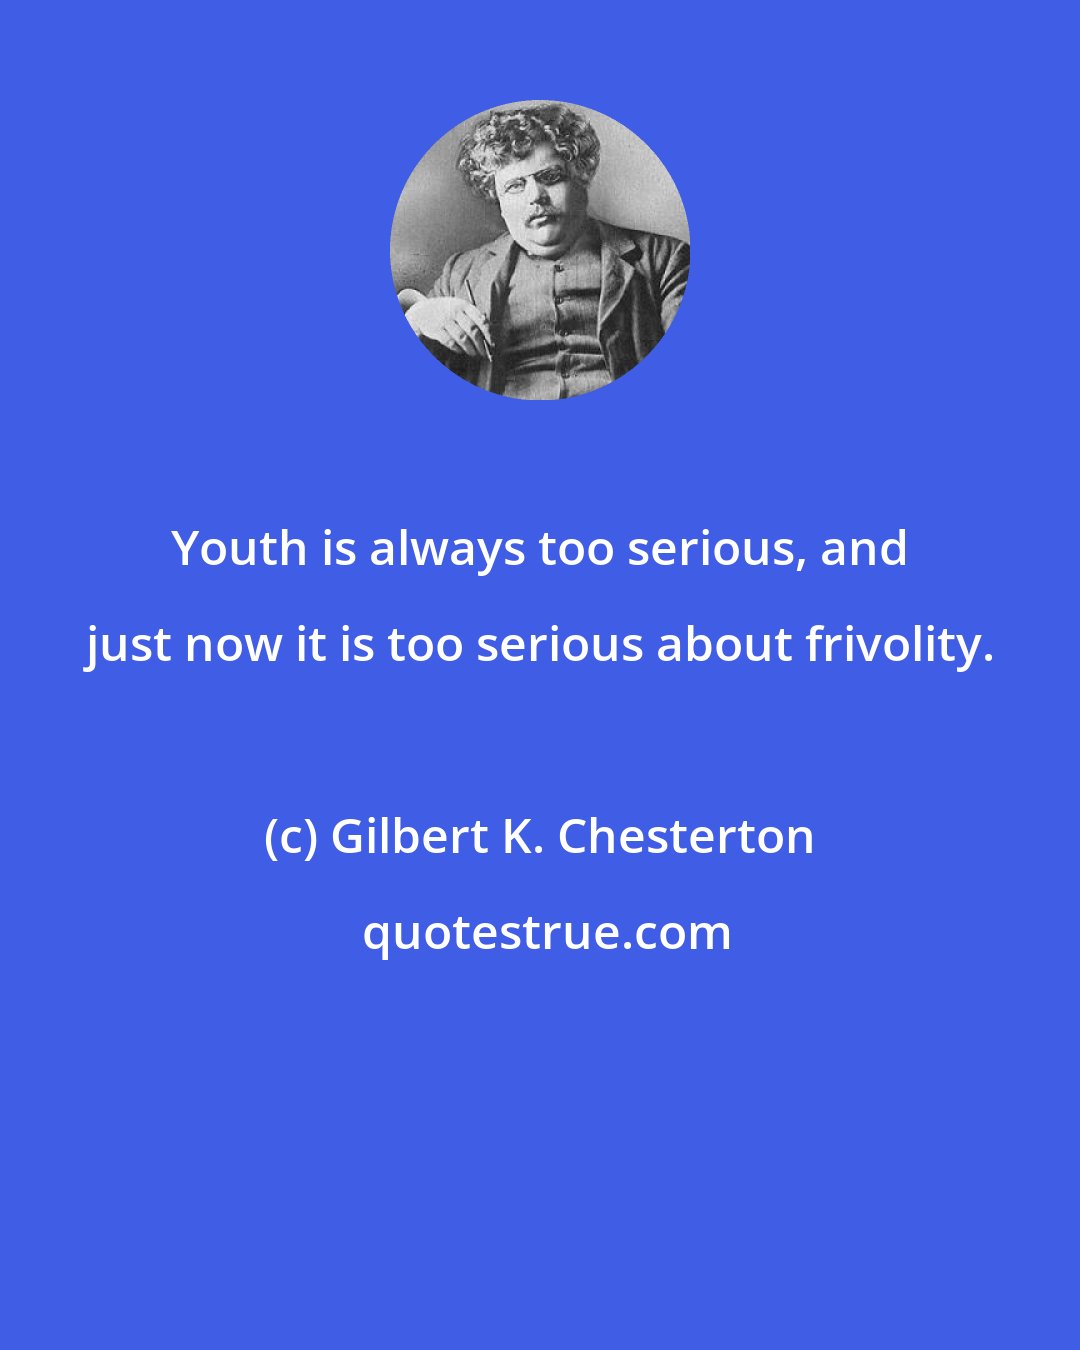 Gilbert K. Chesterton: Youth is always too serious, and just now it is too serious about frivolity.